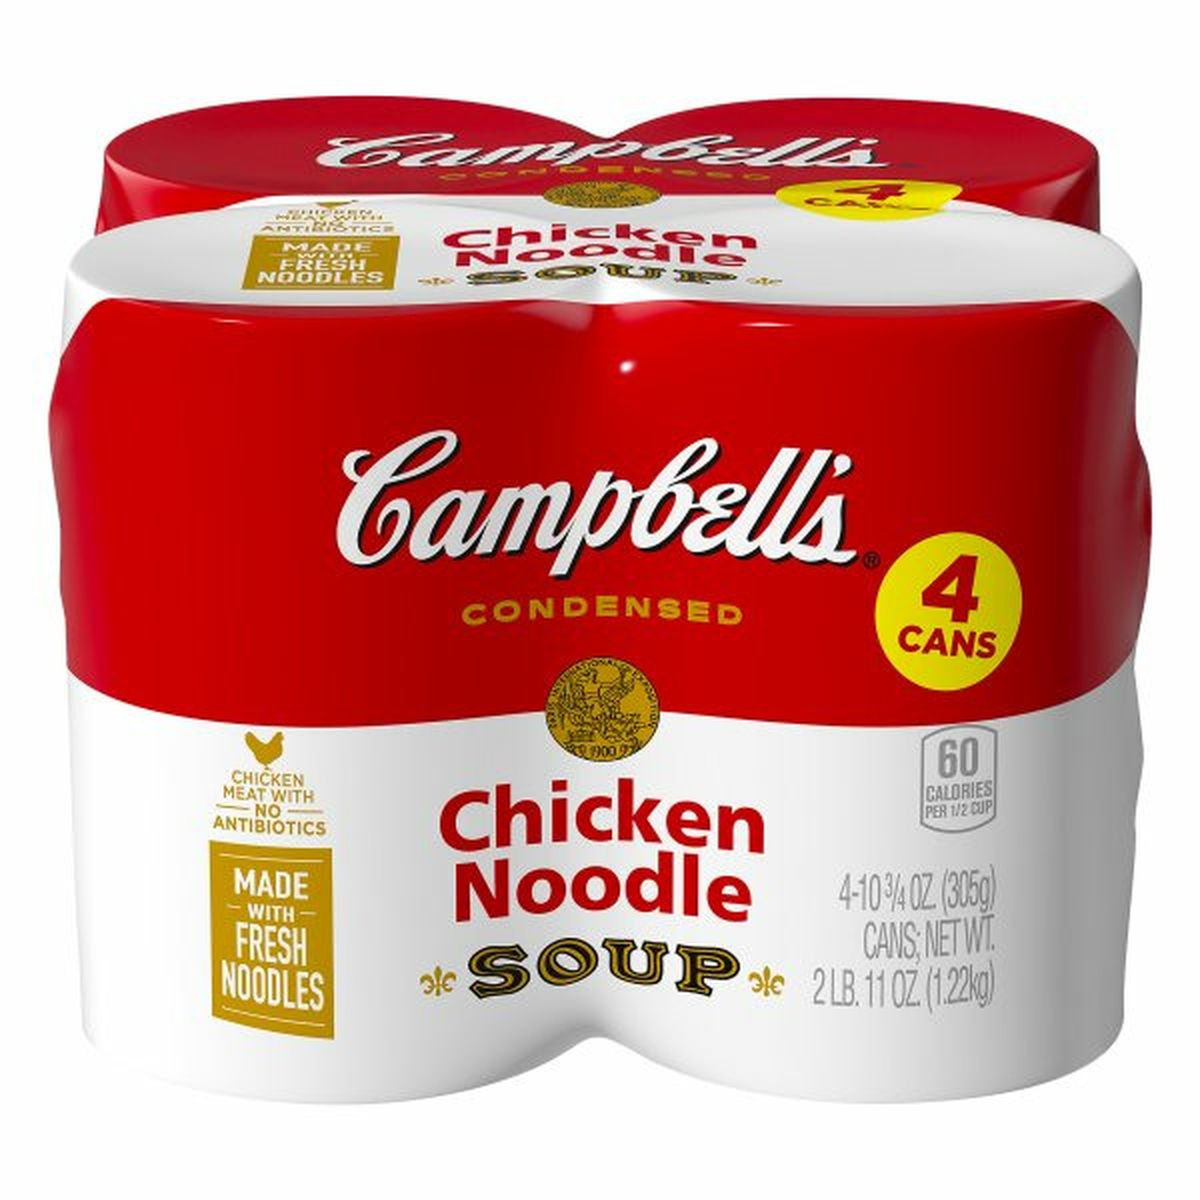 Calories in Campbell'ss Condensed Soup, Chicken Noodle, Condensed, 4 Pack